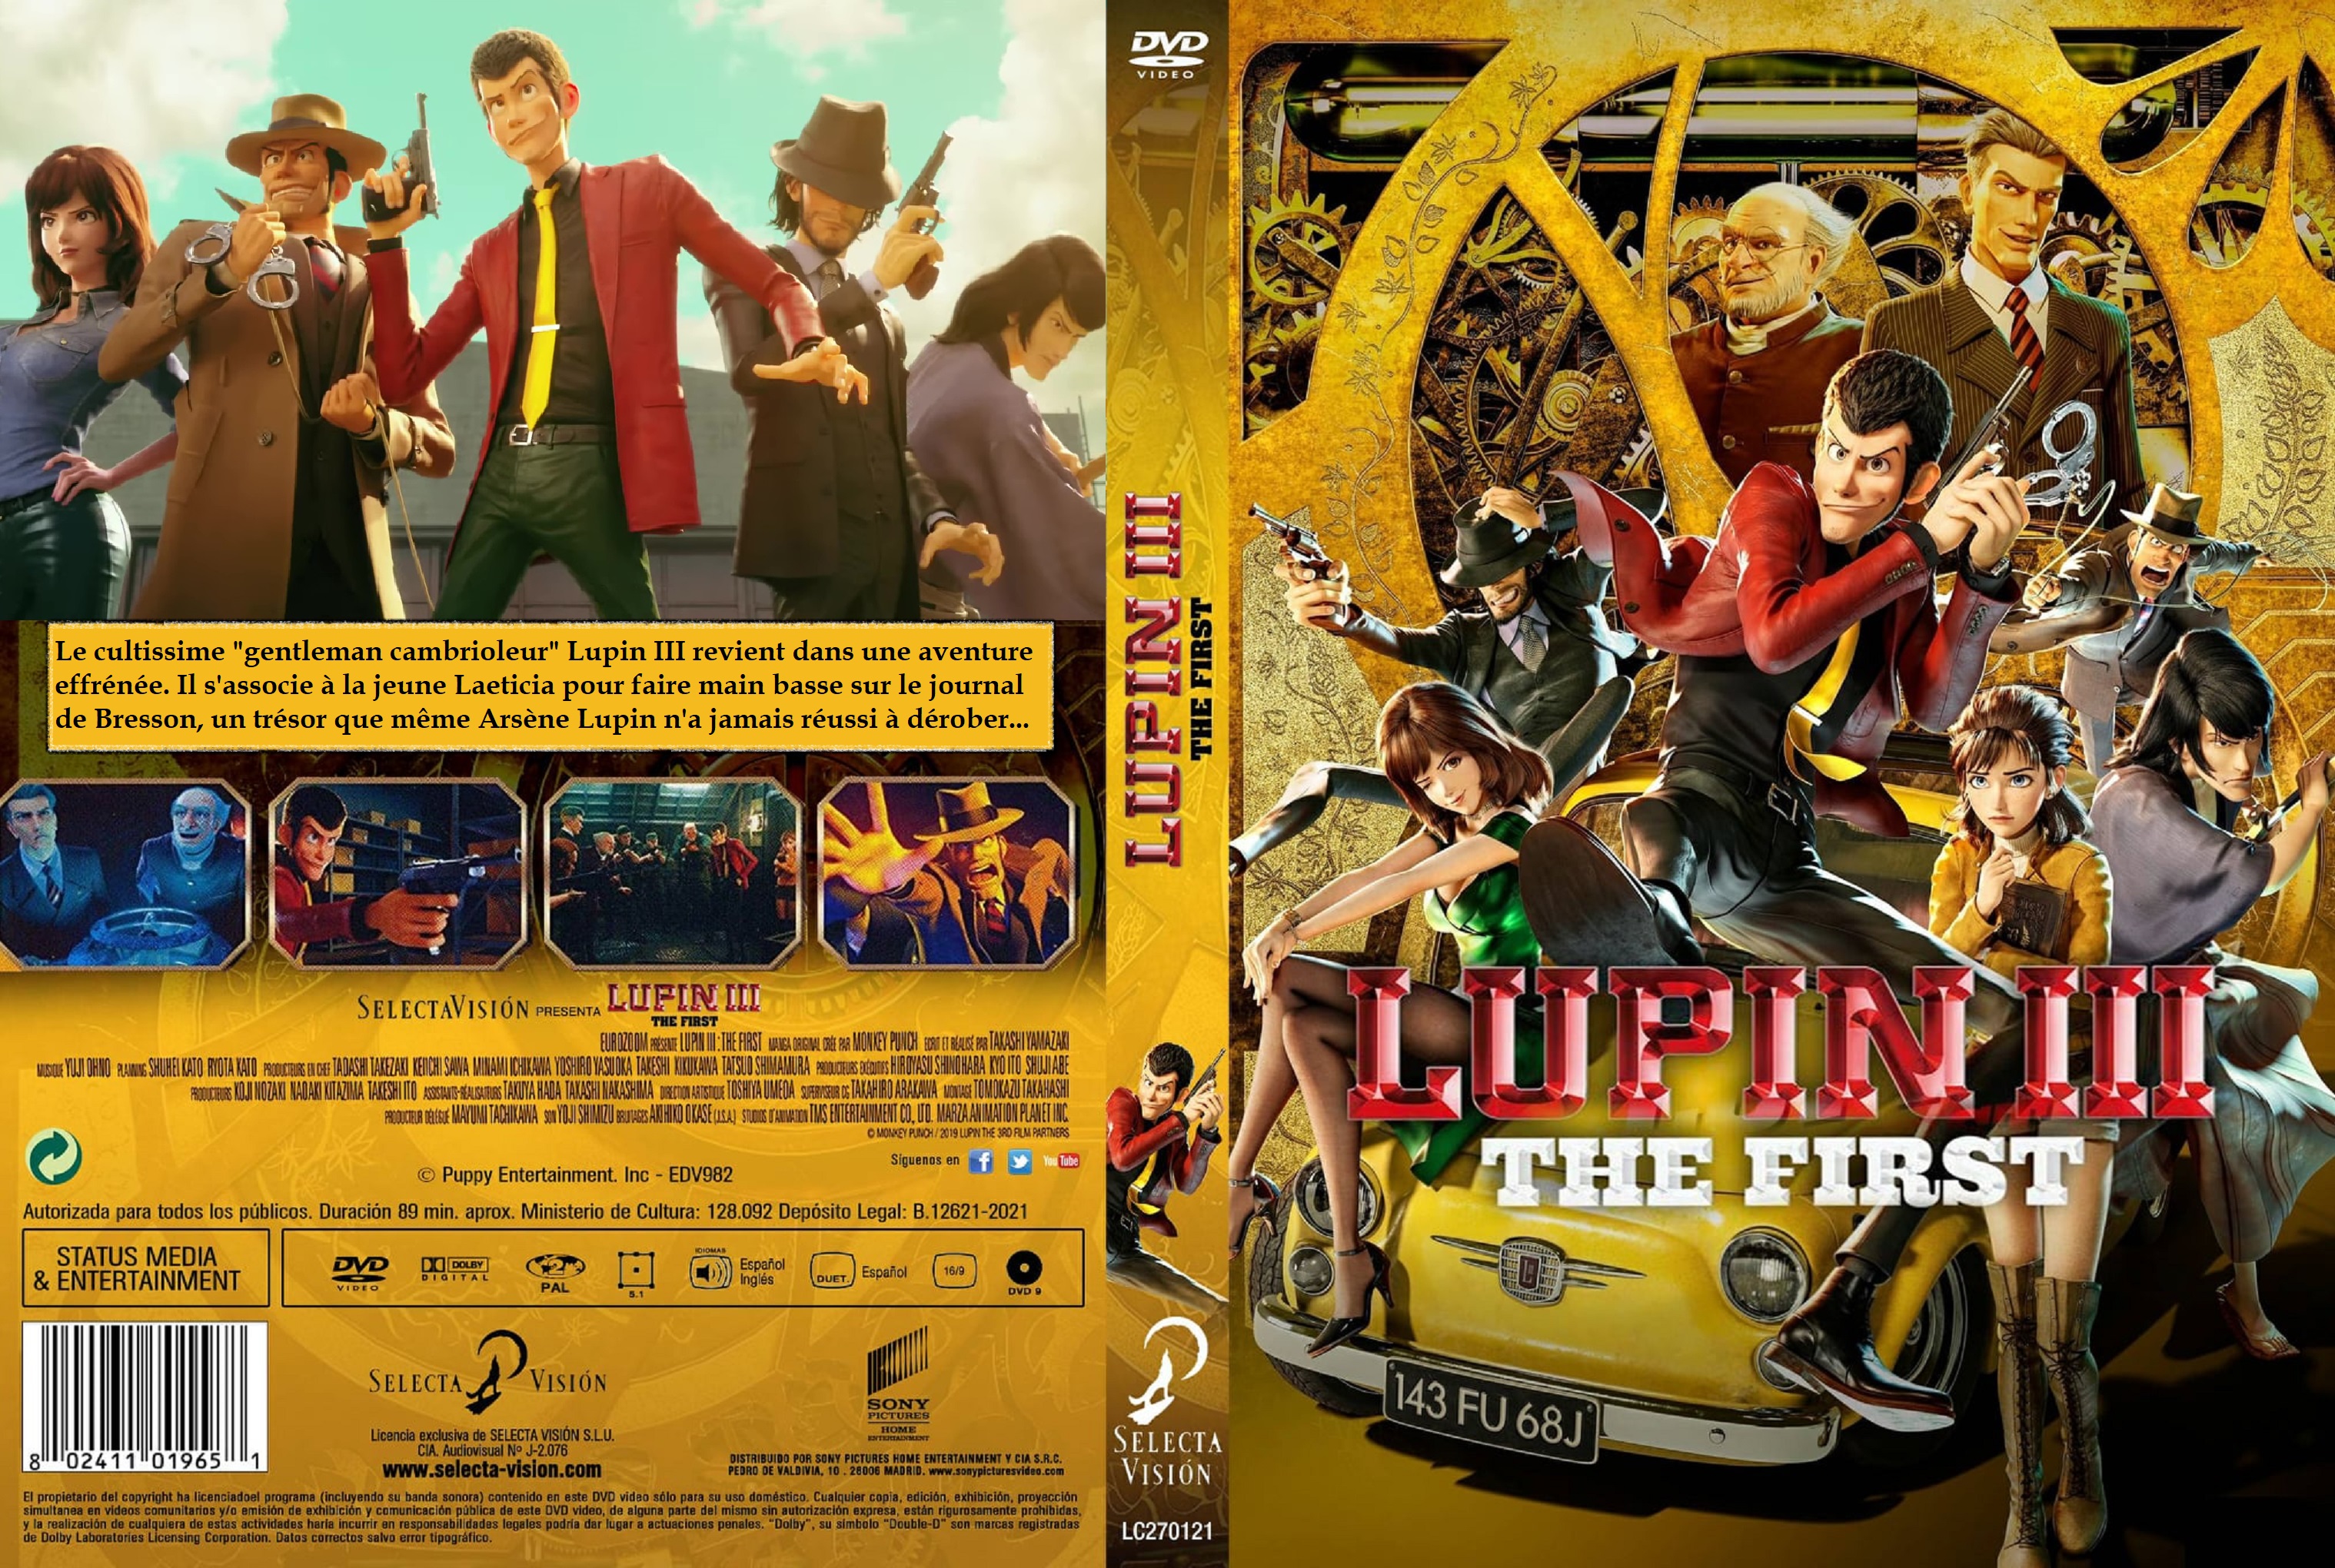 Jaquette DVD Lupin III The First custom